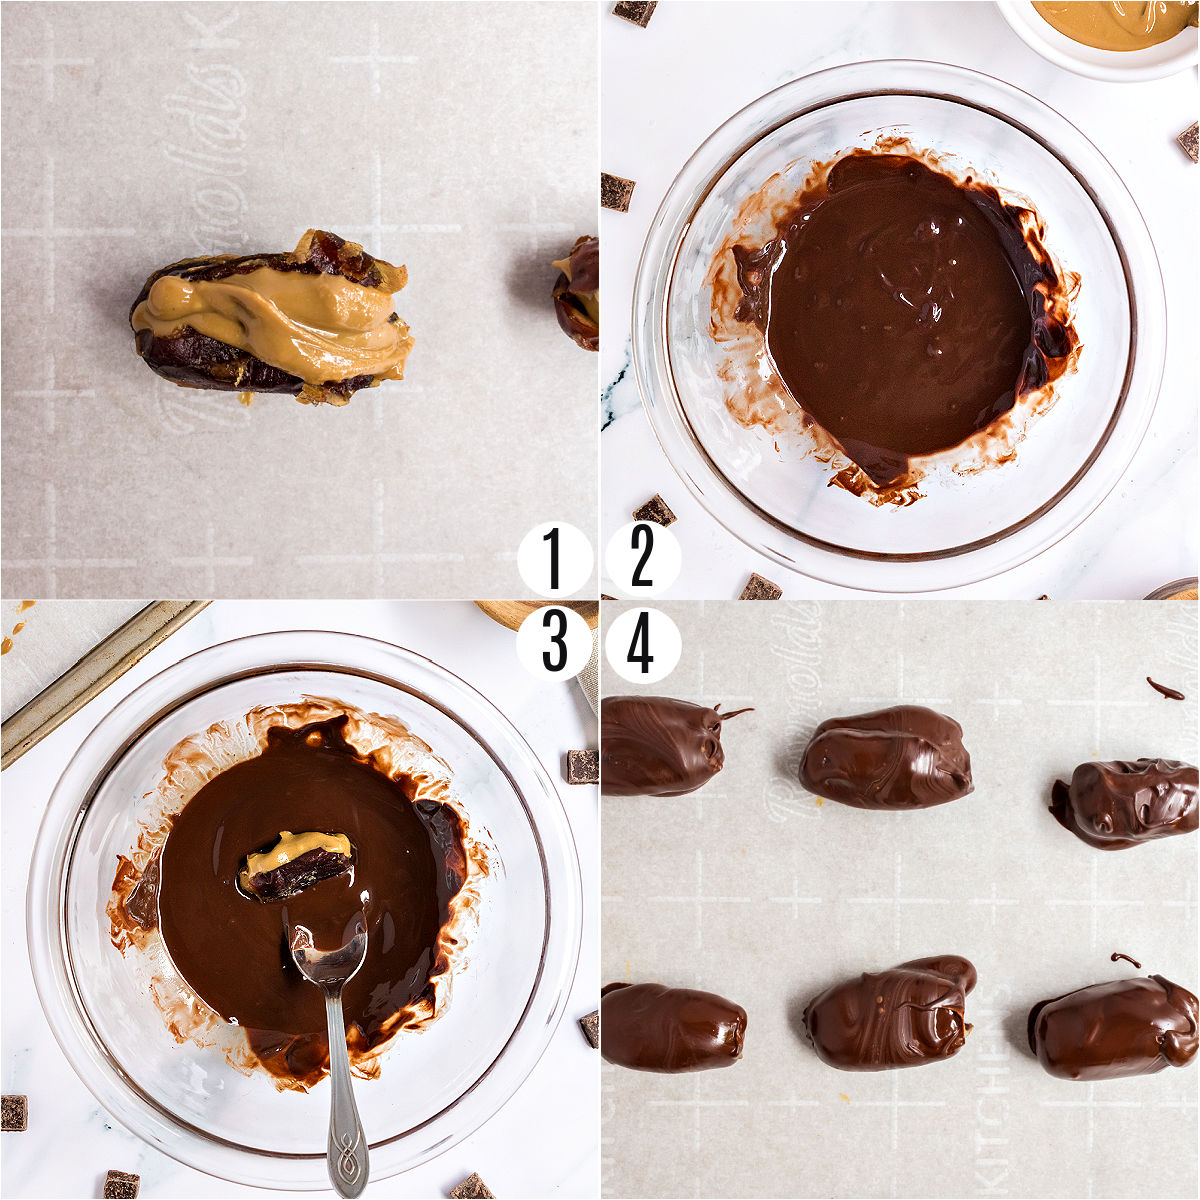 Step by step photos showing how to make chocolate dates.